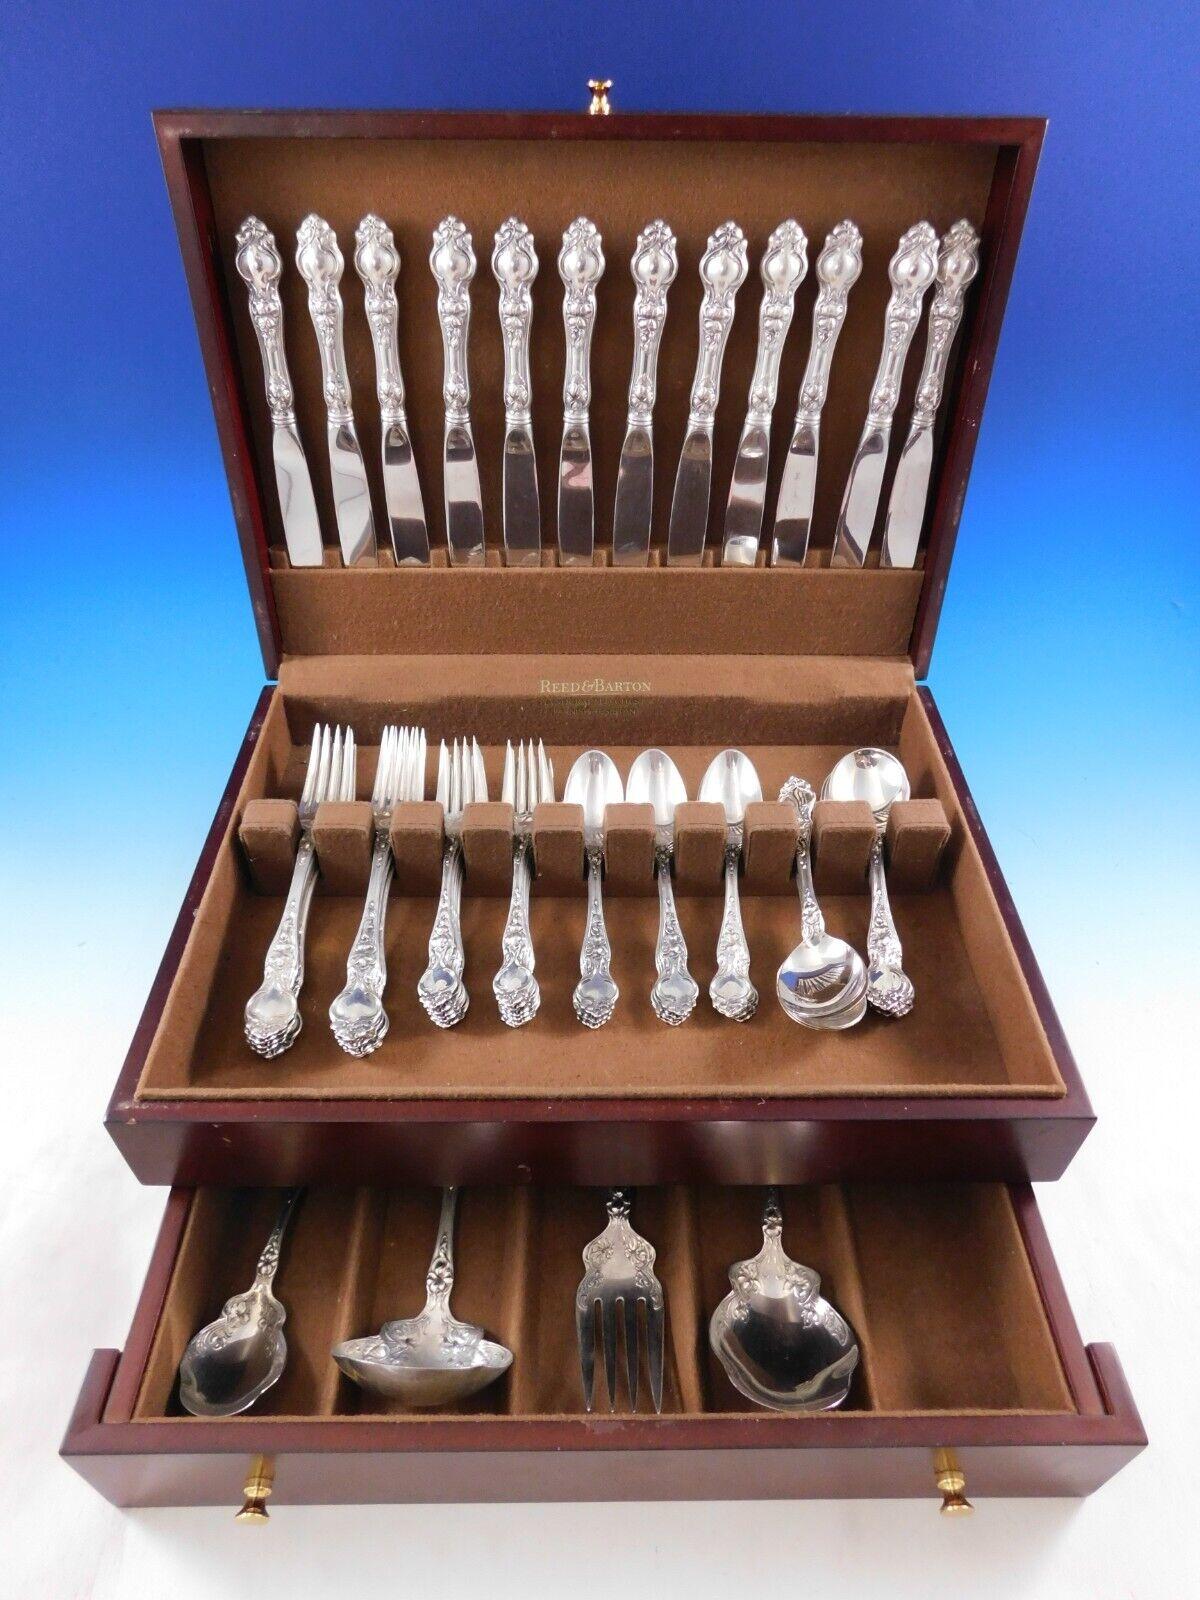 Violet by Wallace sterling silver Flatware set - 64 pieces. This set includes:

12 Knives, 8 3/4